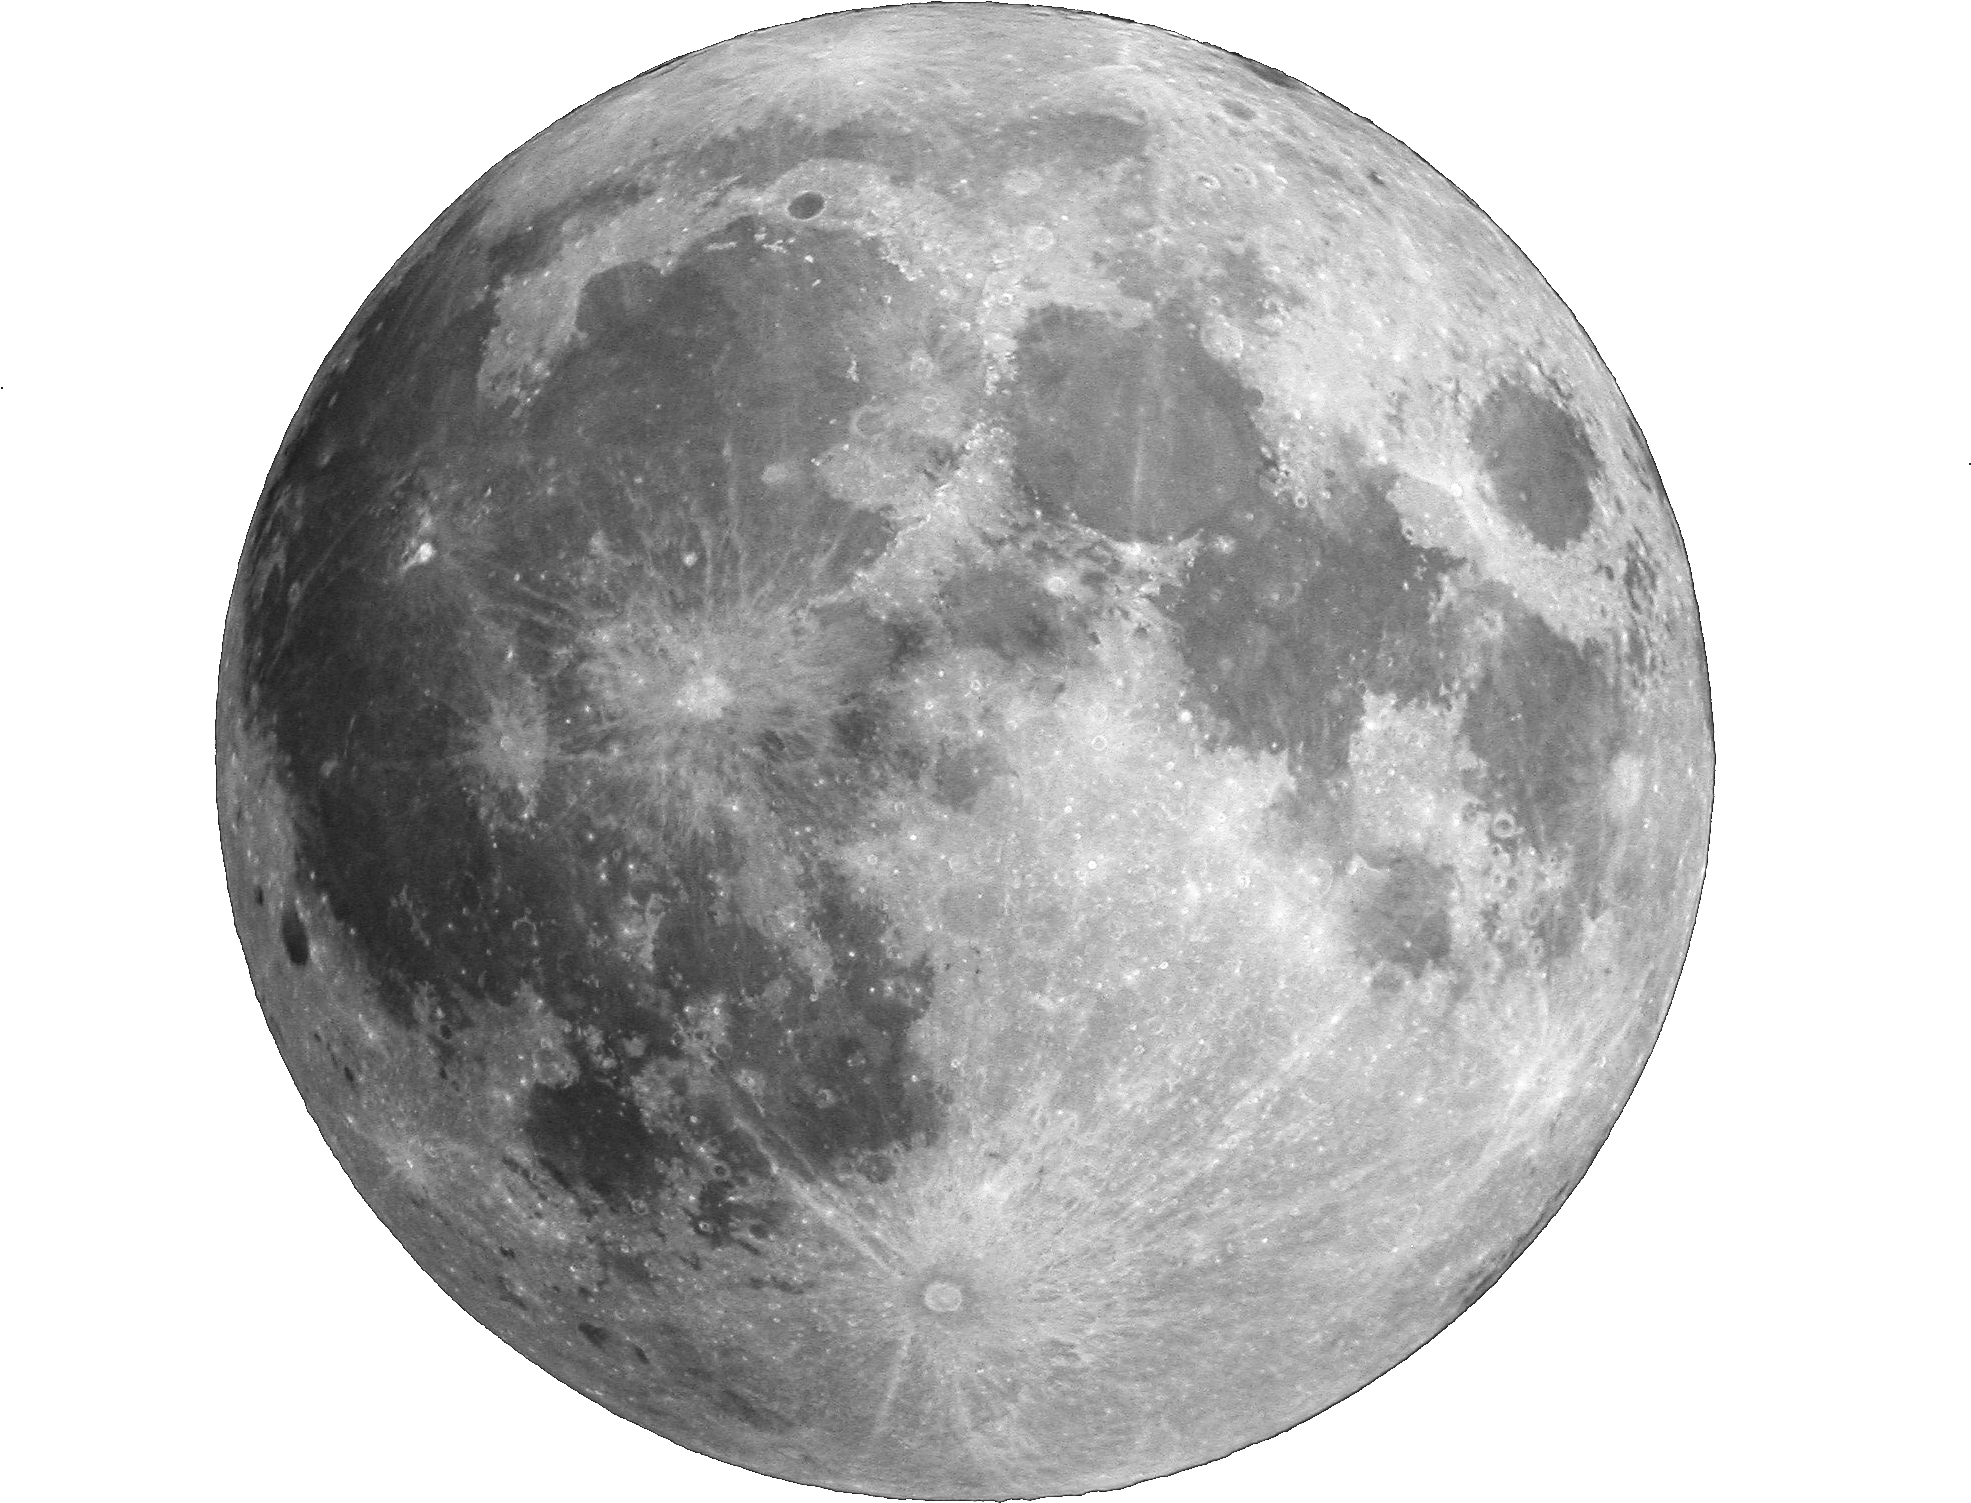 A Full Moon With Many Craters